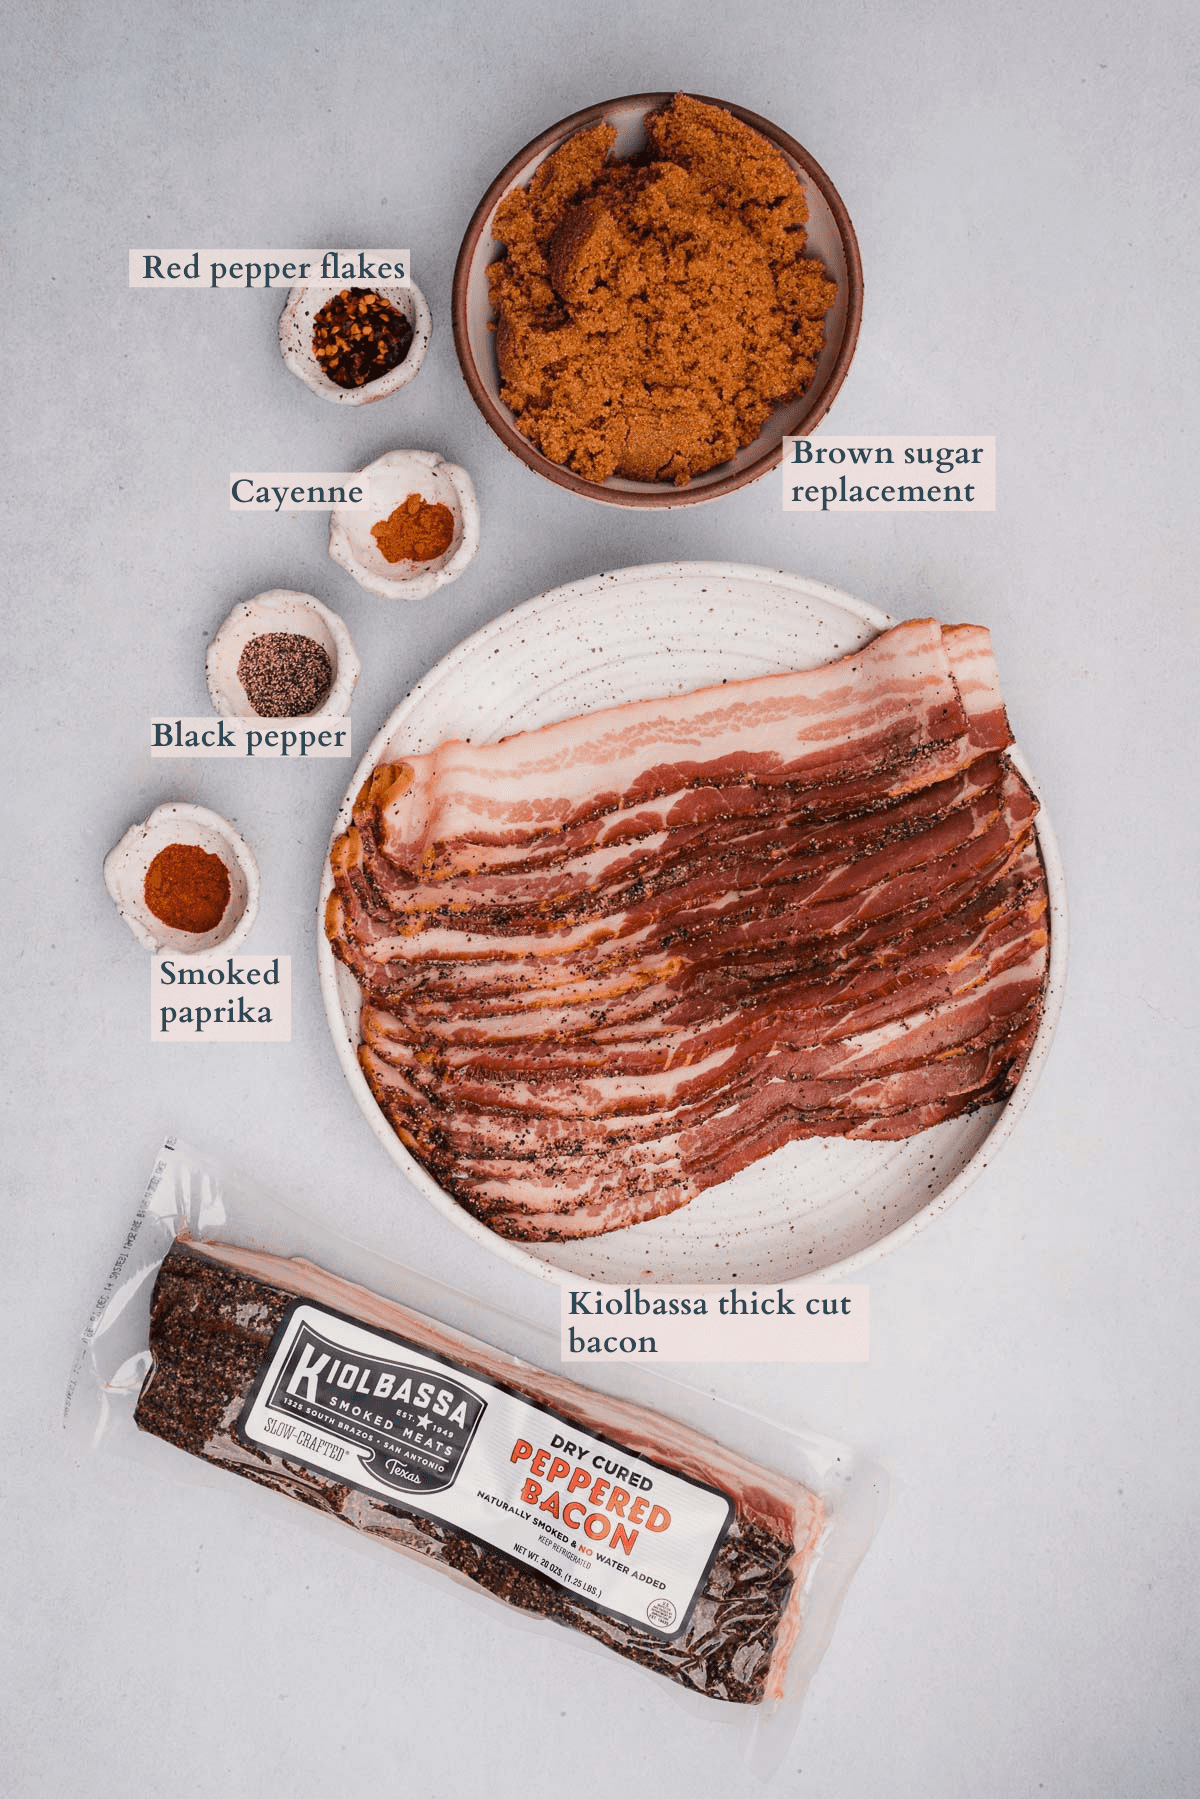 billionaire bacon recipe ingredients with text to denote different ingredients